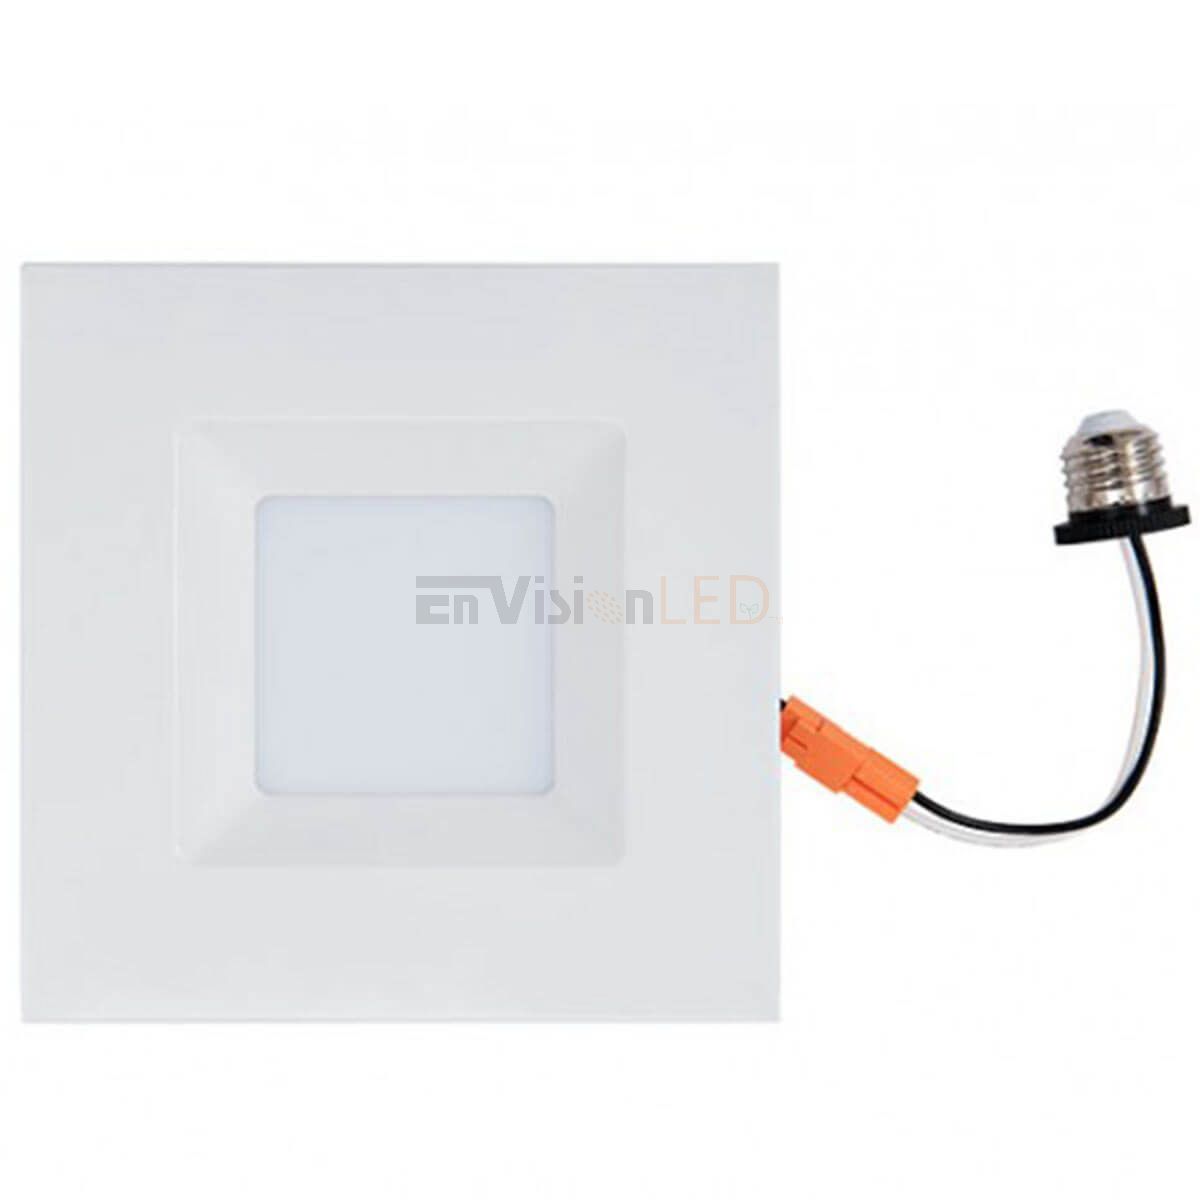 Envision 4" LED 11W Square Downlight Retrofit - Dimmable, 5CCT - Sonic Electric